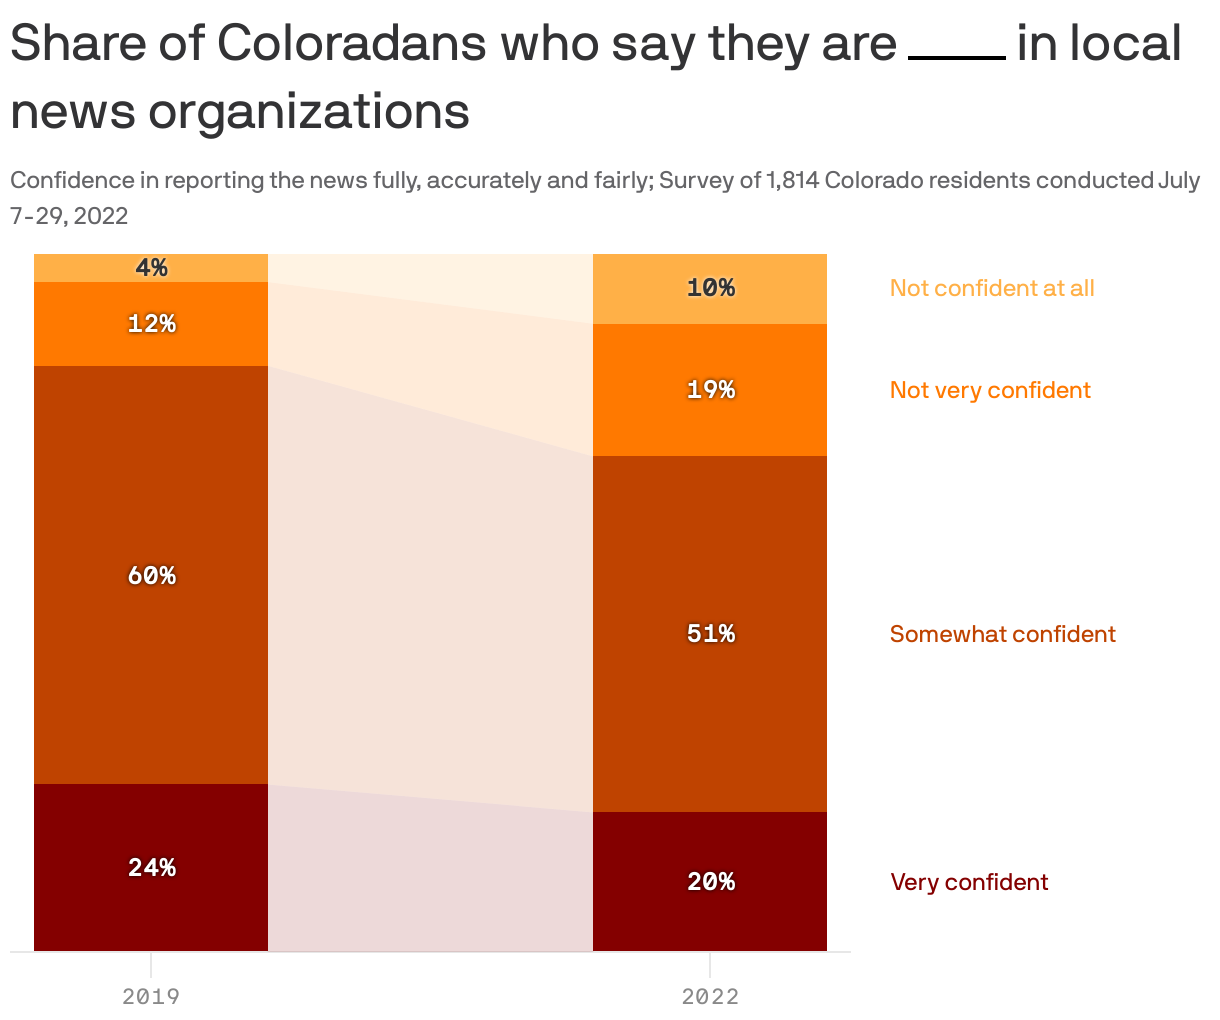 Share of Coloradans who say they are <span style="display: inline-block;border-bottom:2px solid #000;width:3ch;"></span> in local news organizations